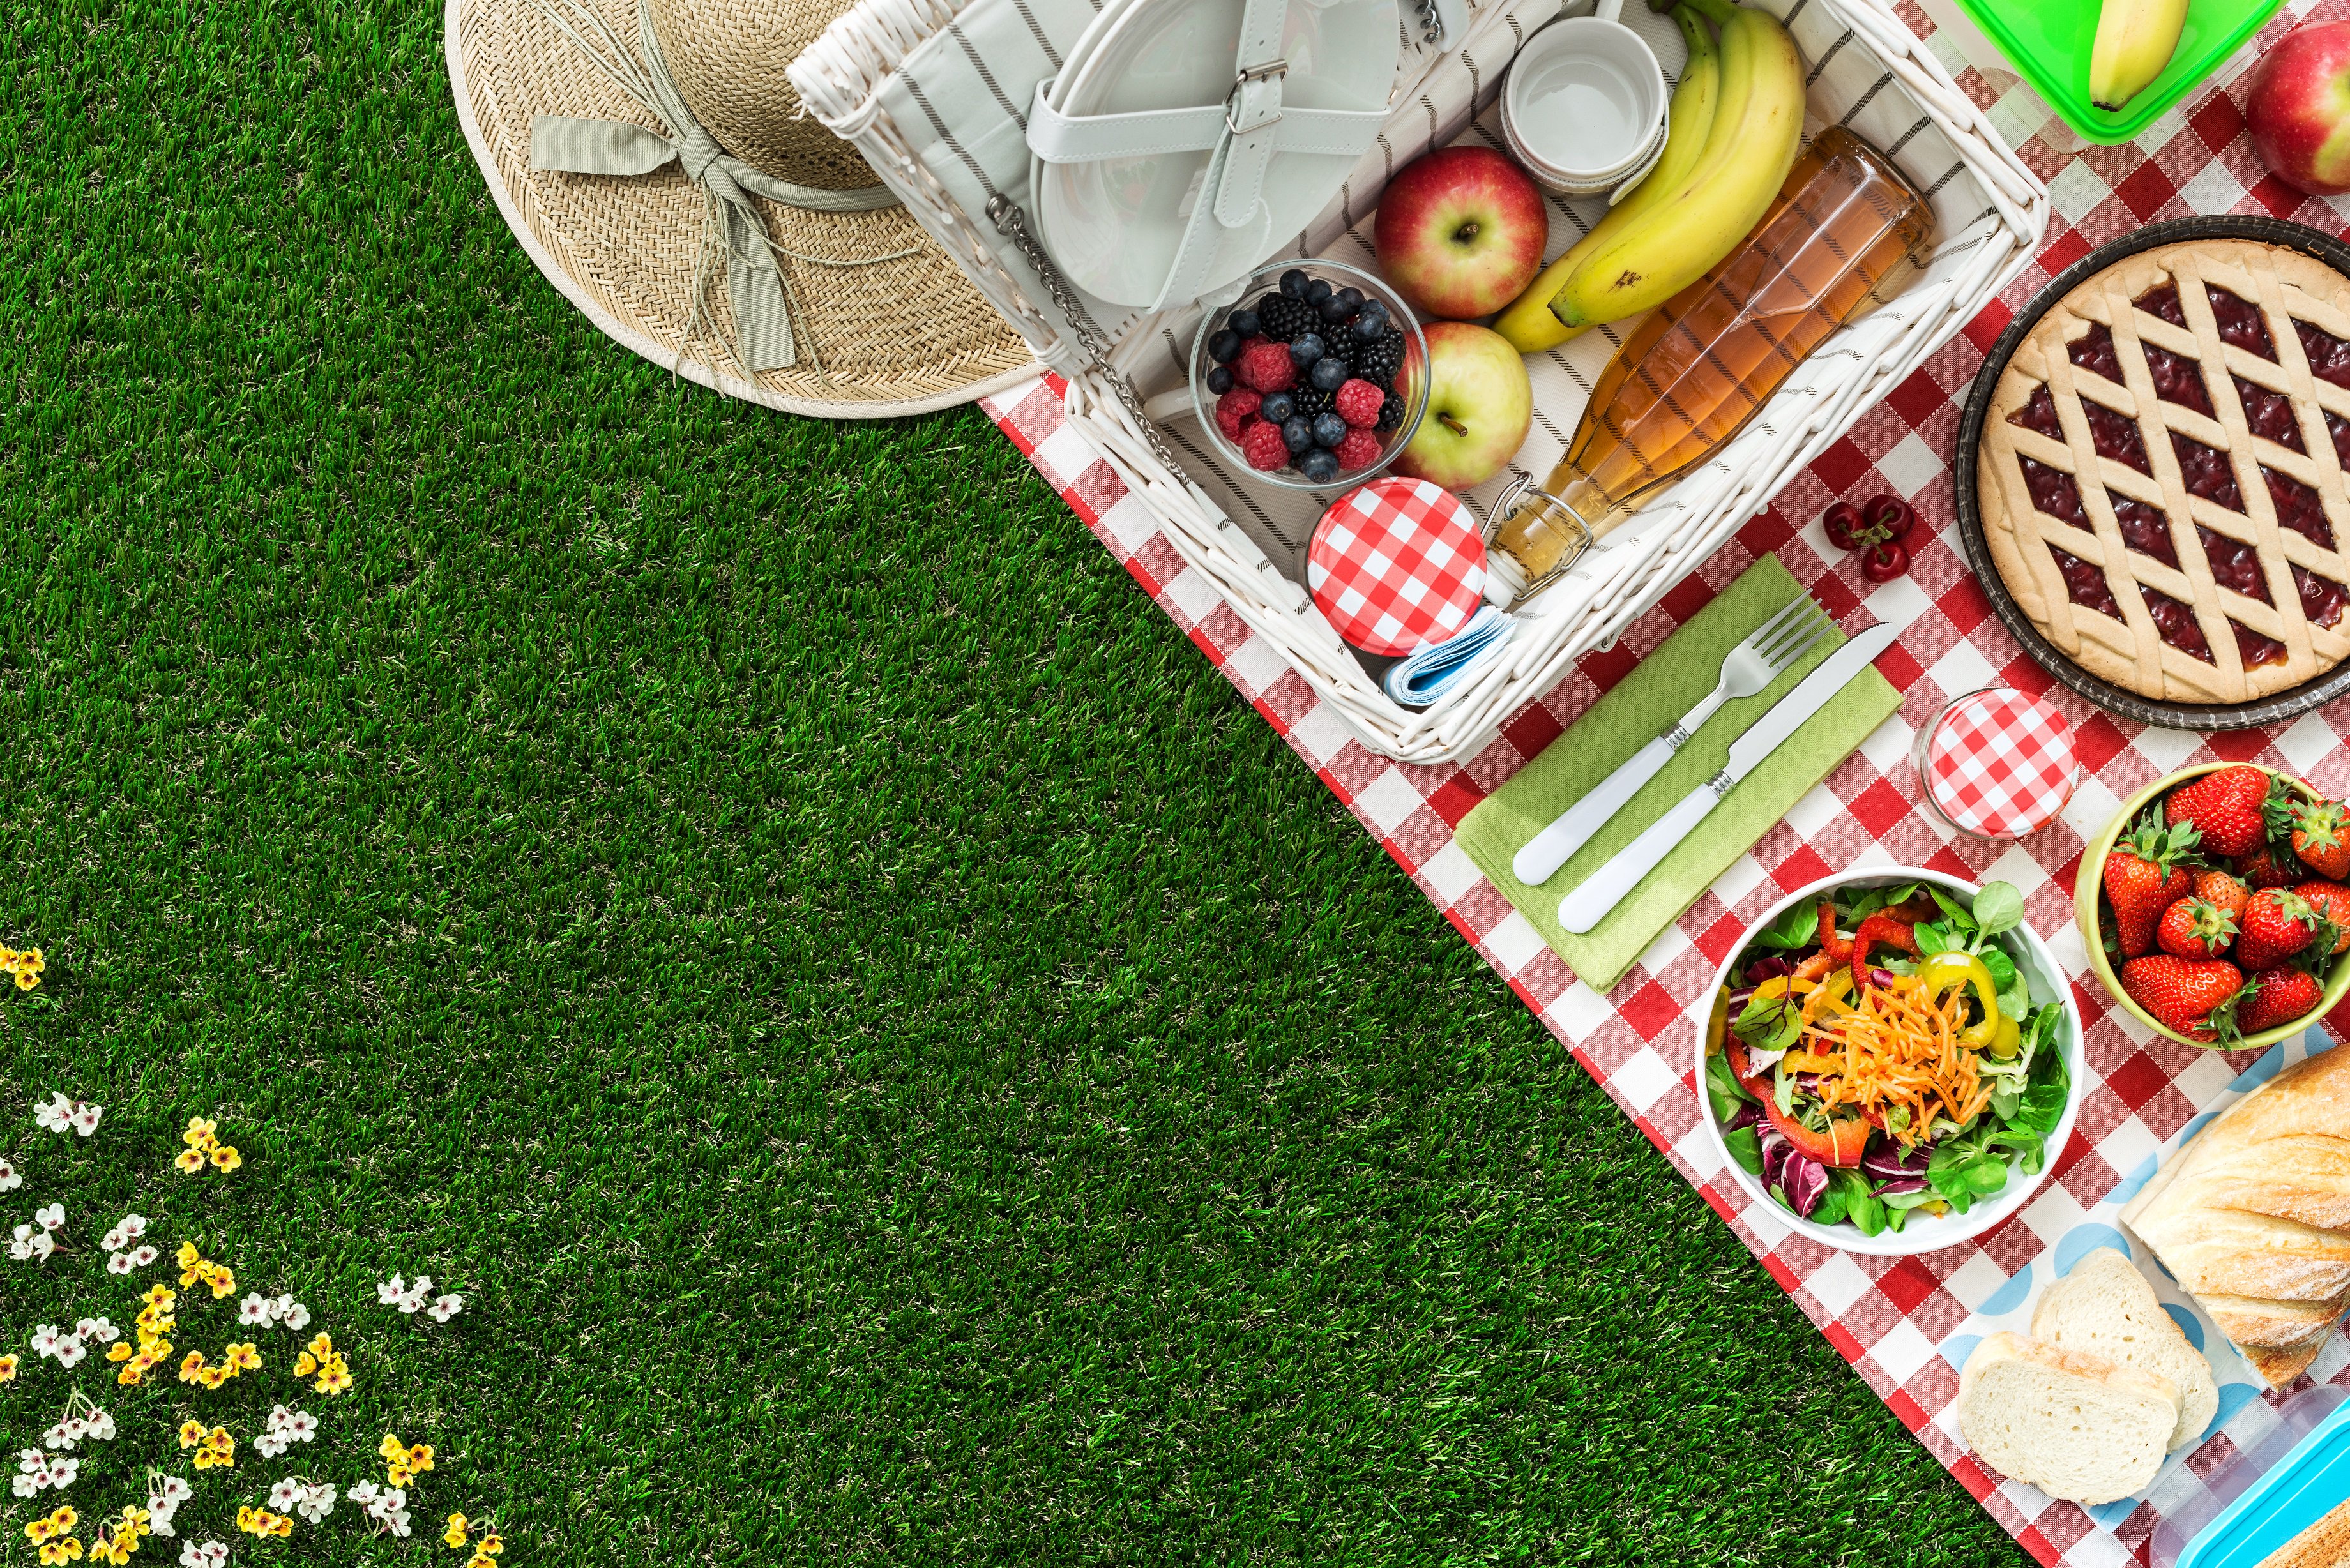 Have You Tried These DIY Summer Picnic Ideas? - Create & Craft Blog